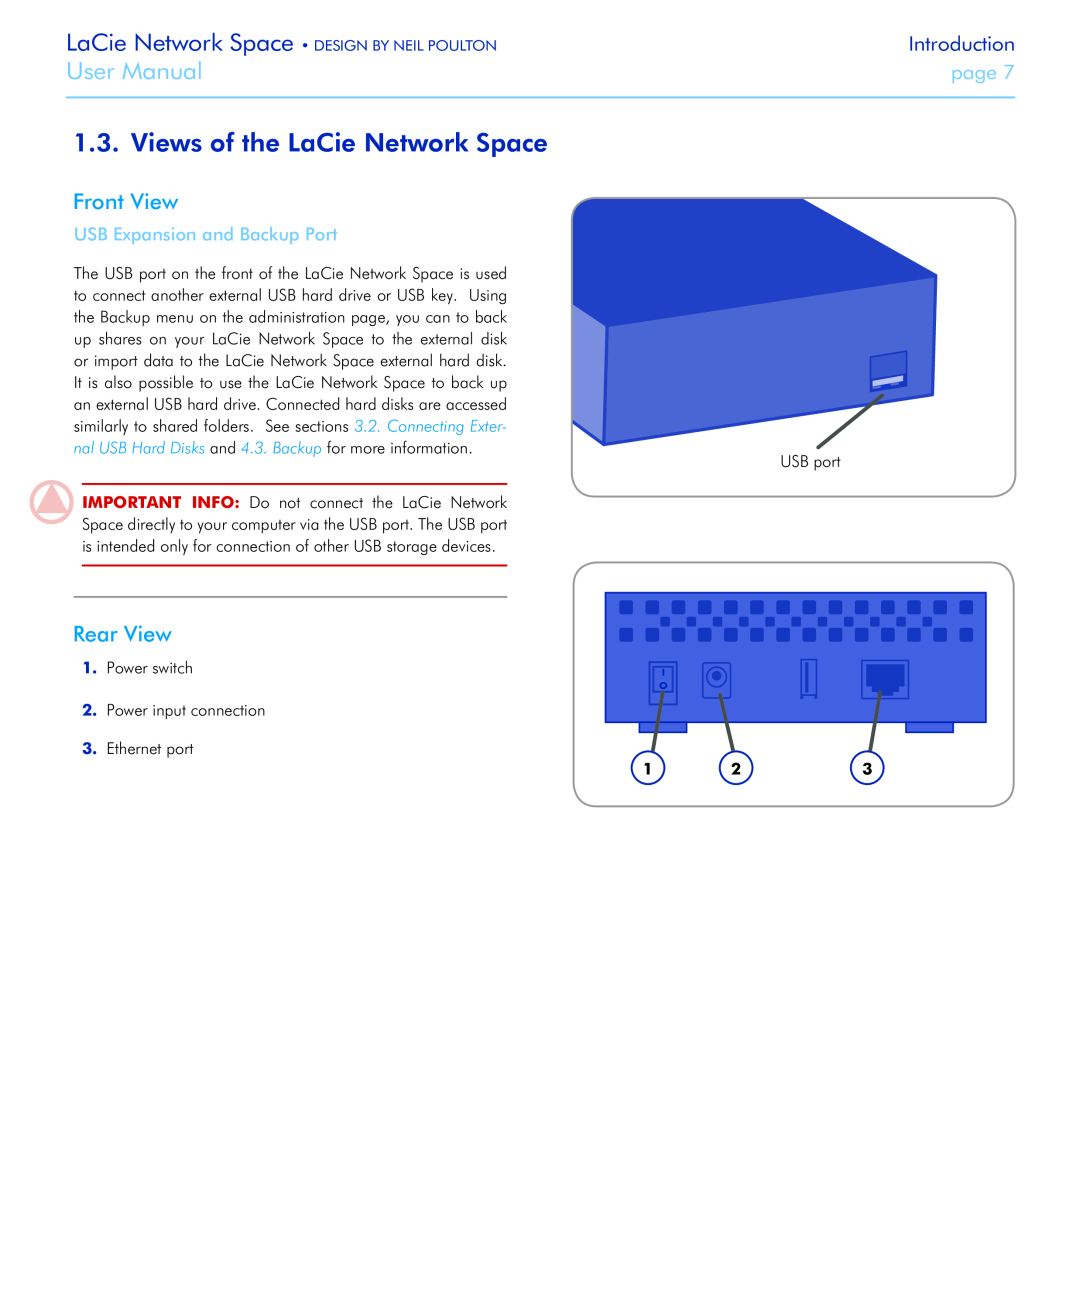 LaCie Views of the LaCie Network Space, Front View, Rear View, USB Expansion and Backup Port, User Manual, Introduction 